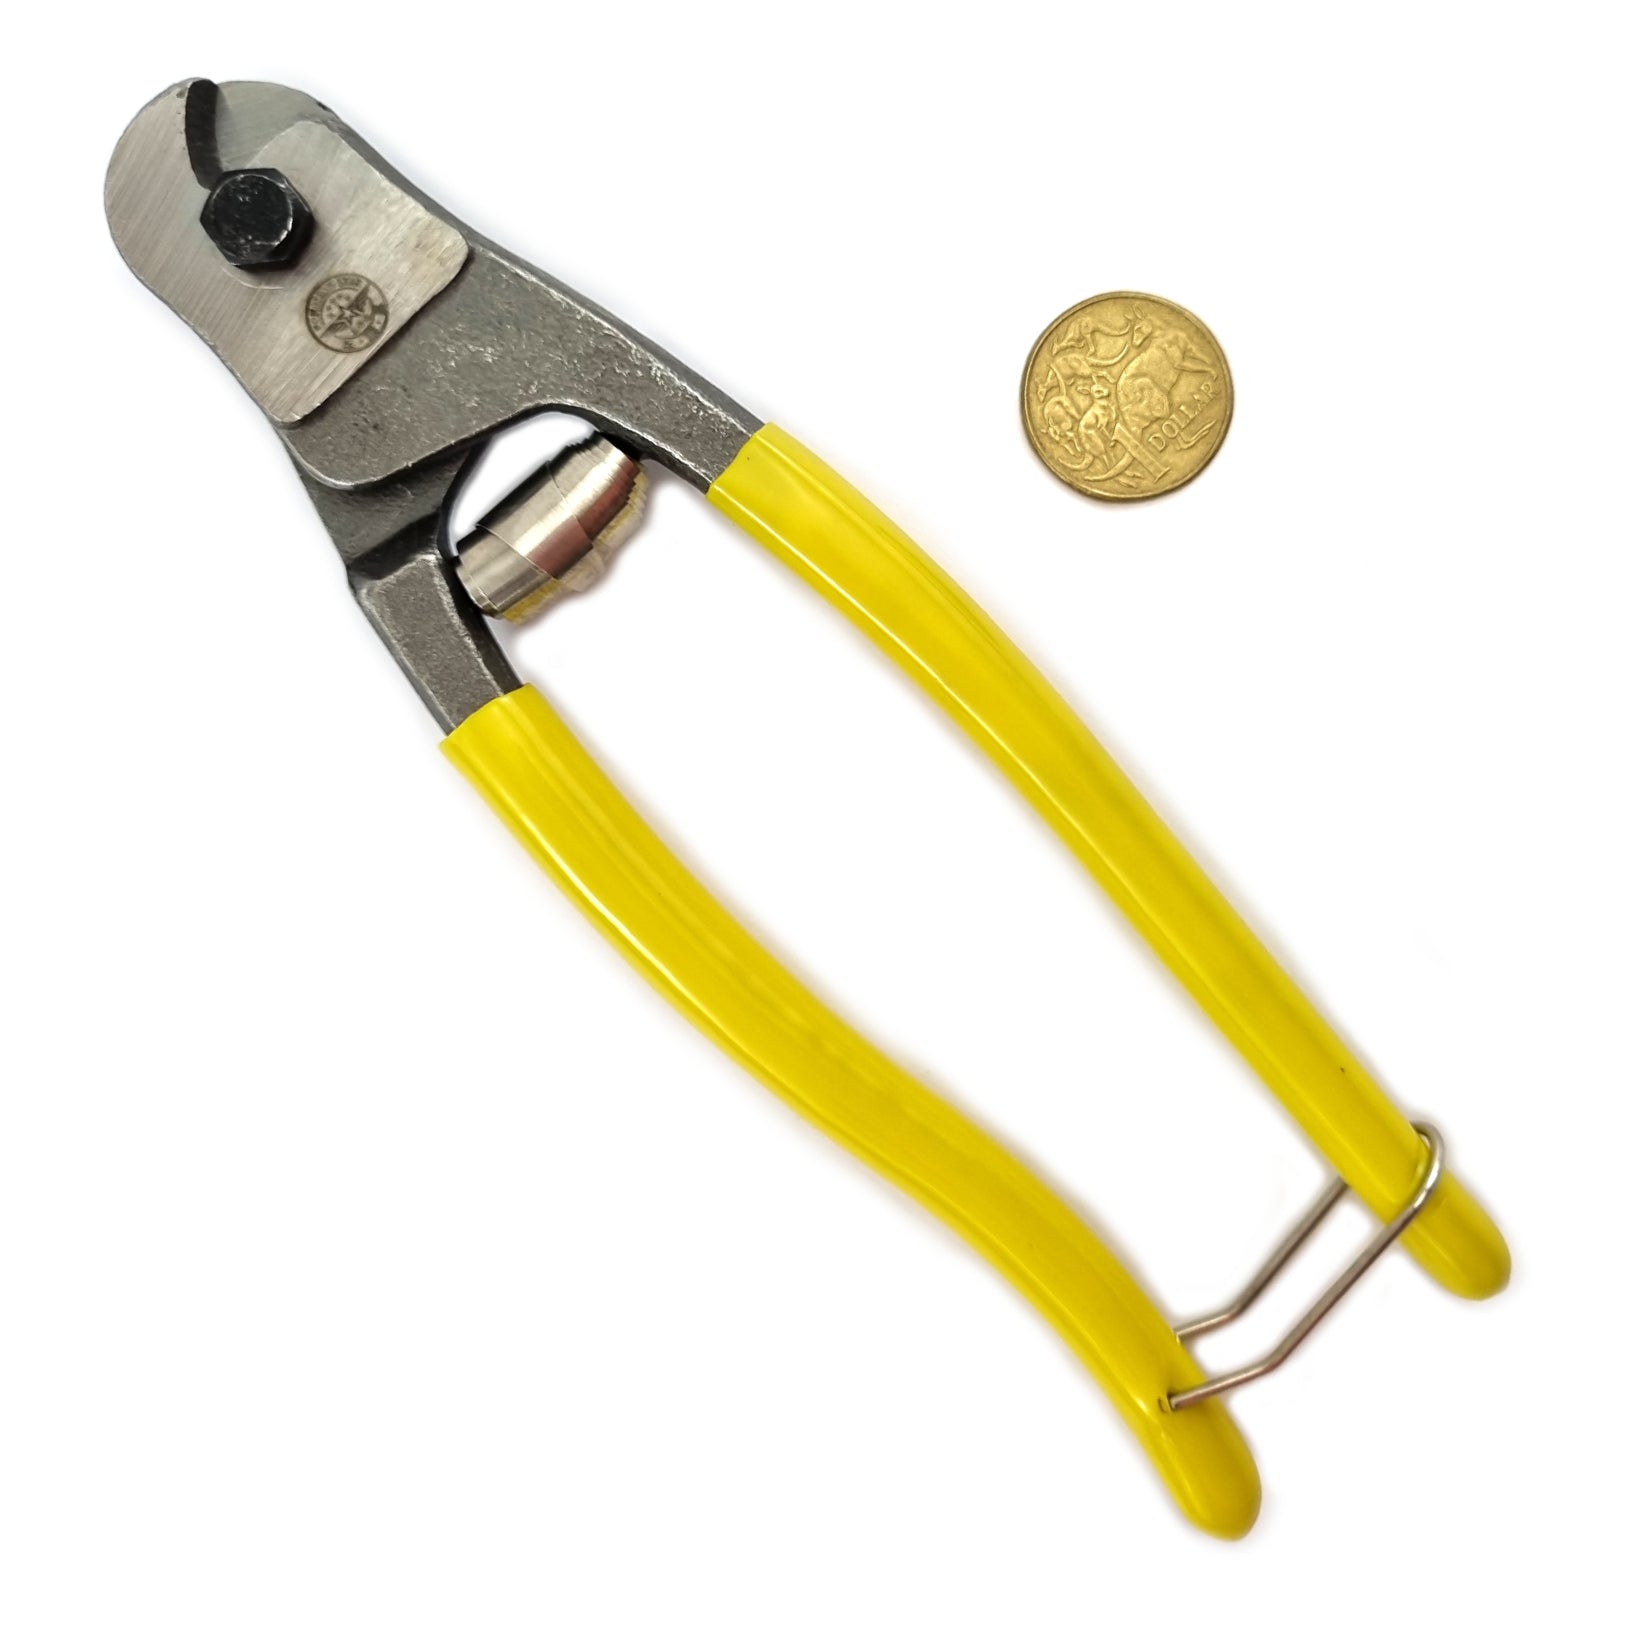 Wire Rope Cutter (also known as Wire Cable Cutter or Cable Cutter). Shop tools and hardware online. Australia wide shipping. Chain.com.au